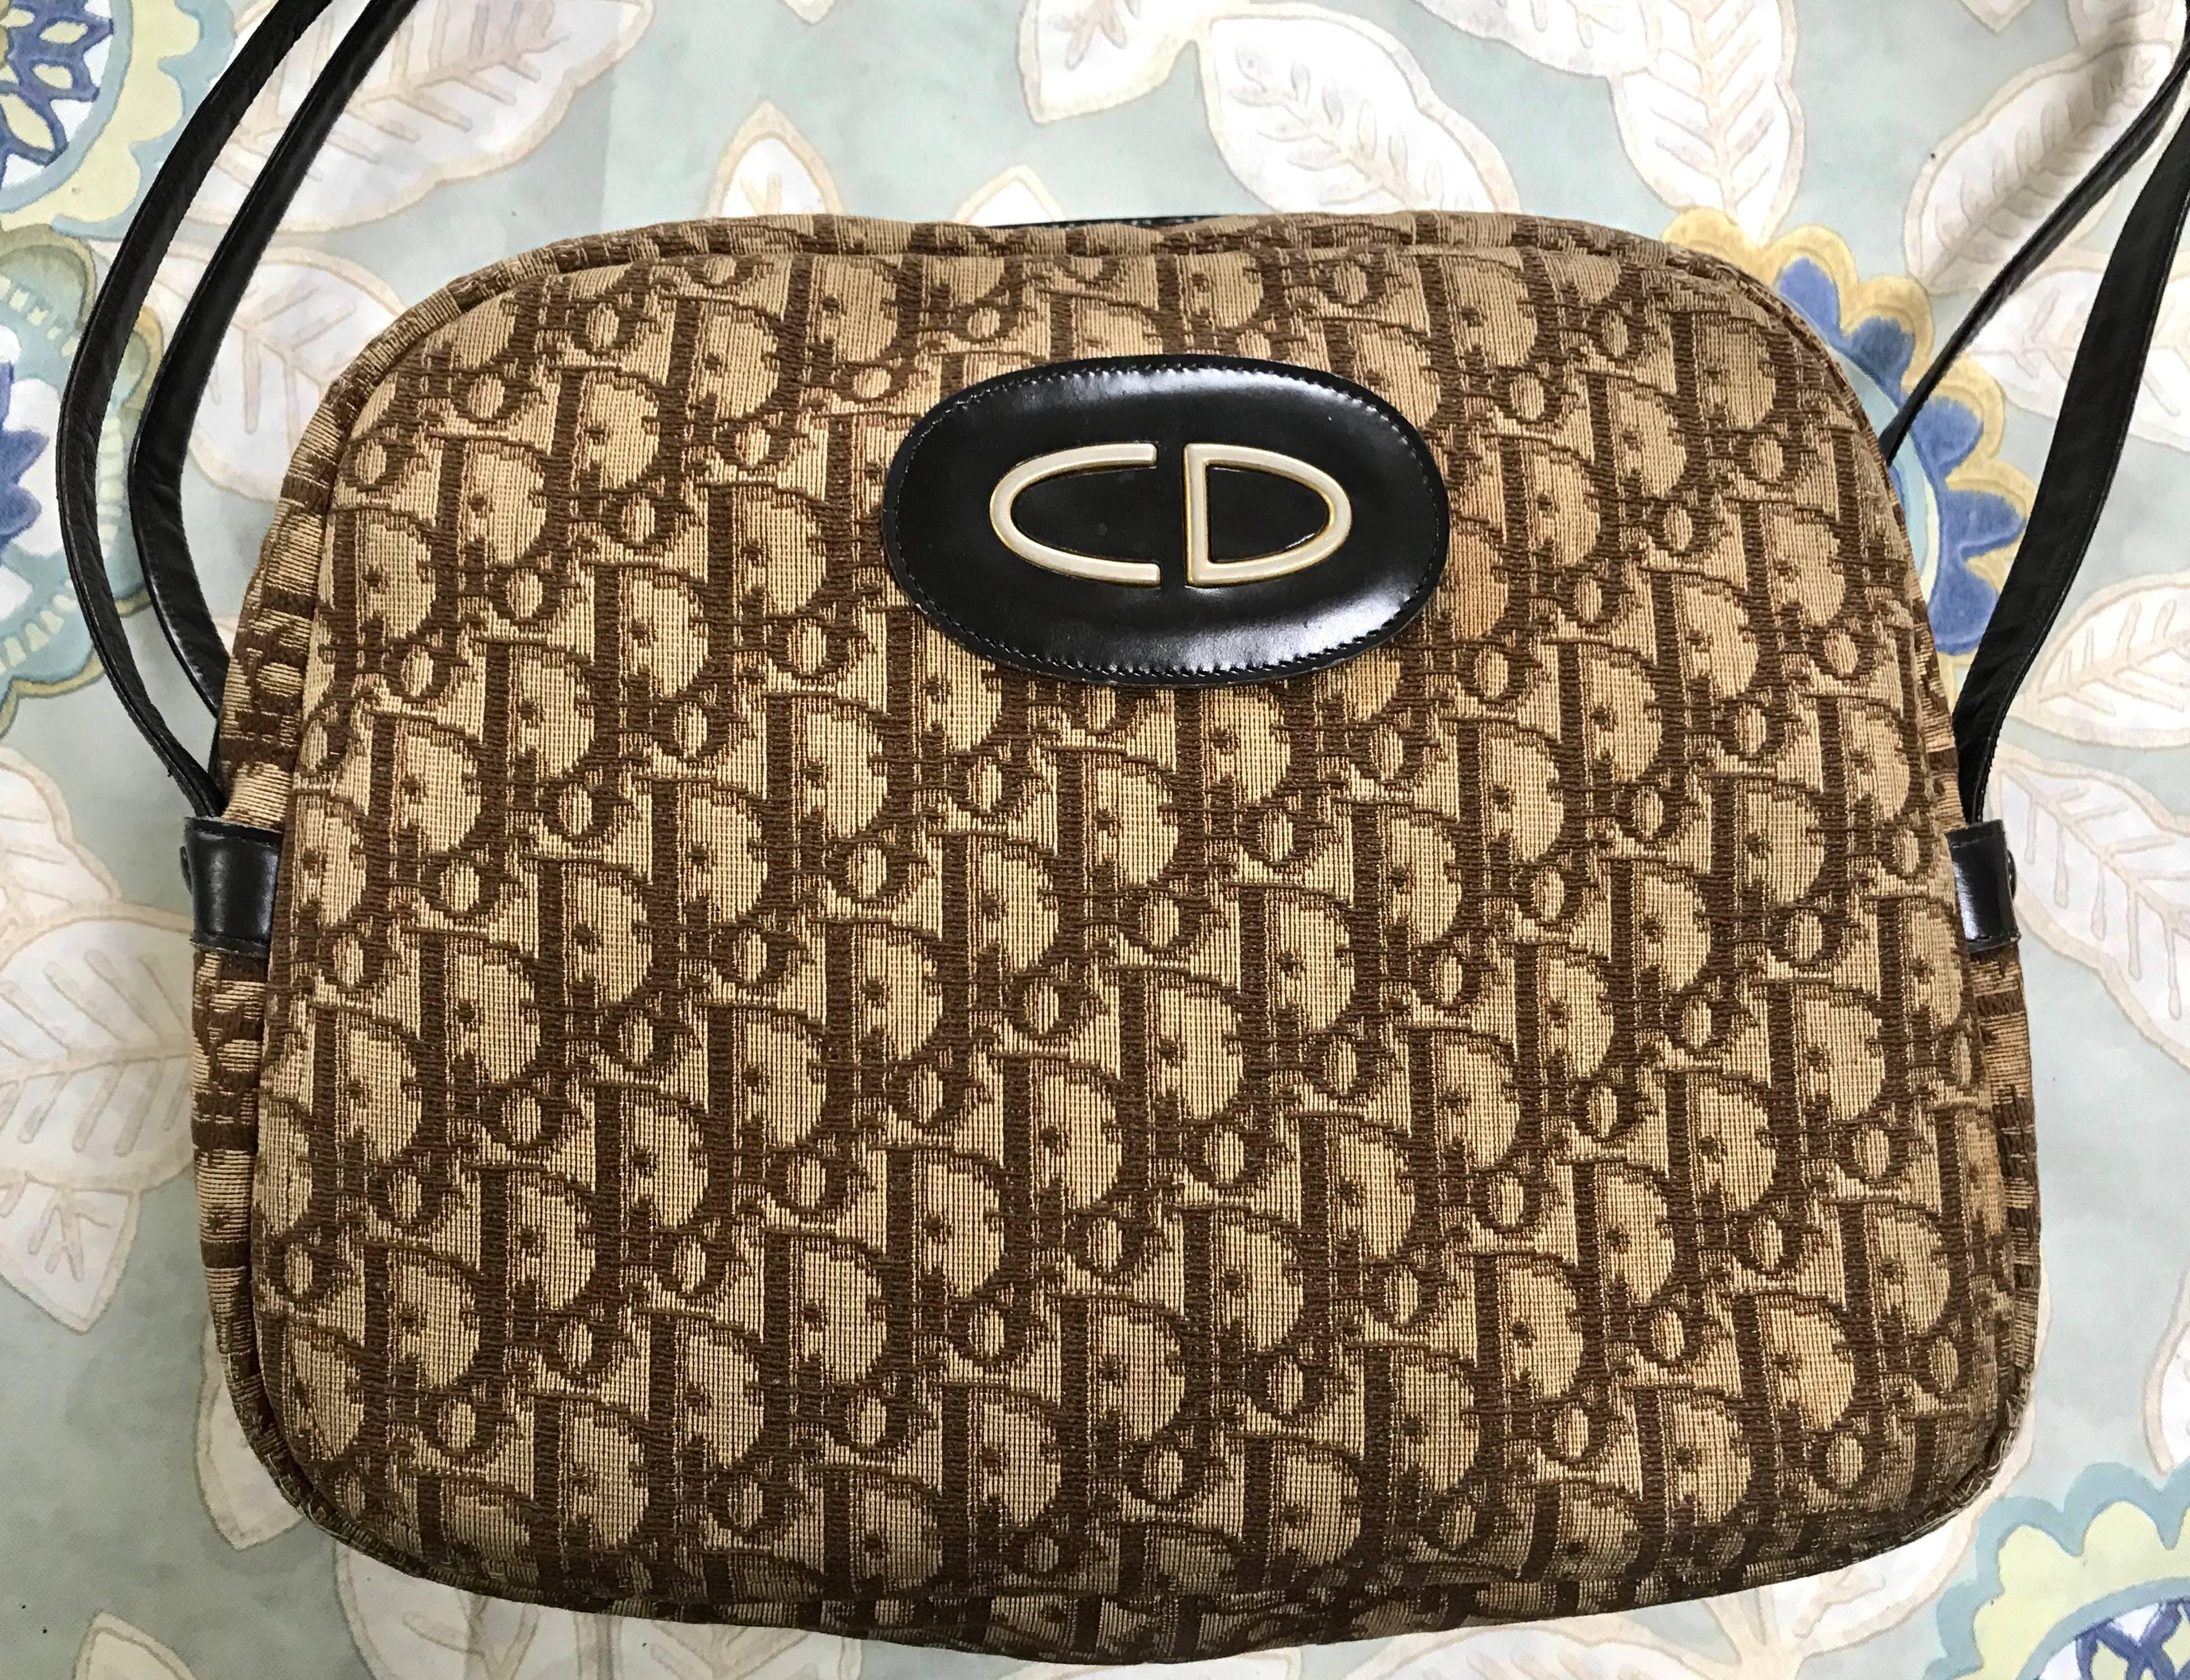 1970s-1980s. Vintage Christian Dior brown trotter jacquard bag with leather straps and a gold tone large CD motif.

So chic and soooo vintage Dior!! Would fit with any outfits and season! Can hold lots of things you need.

This is a Christian Dior